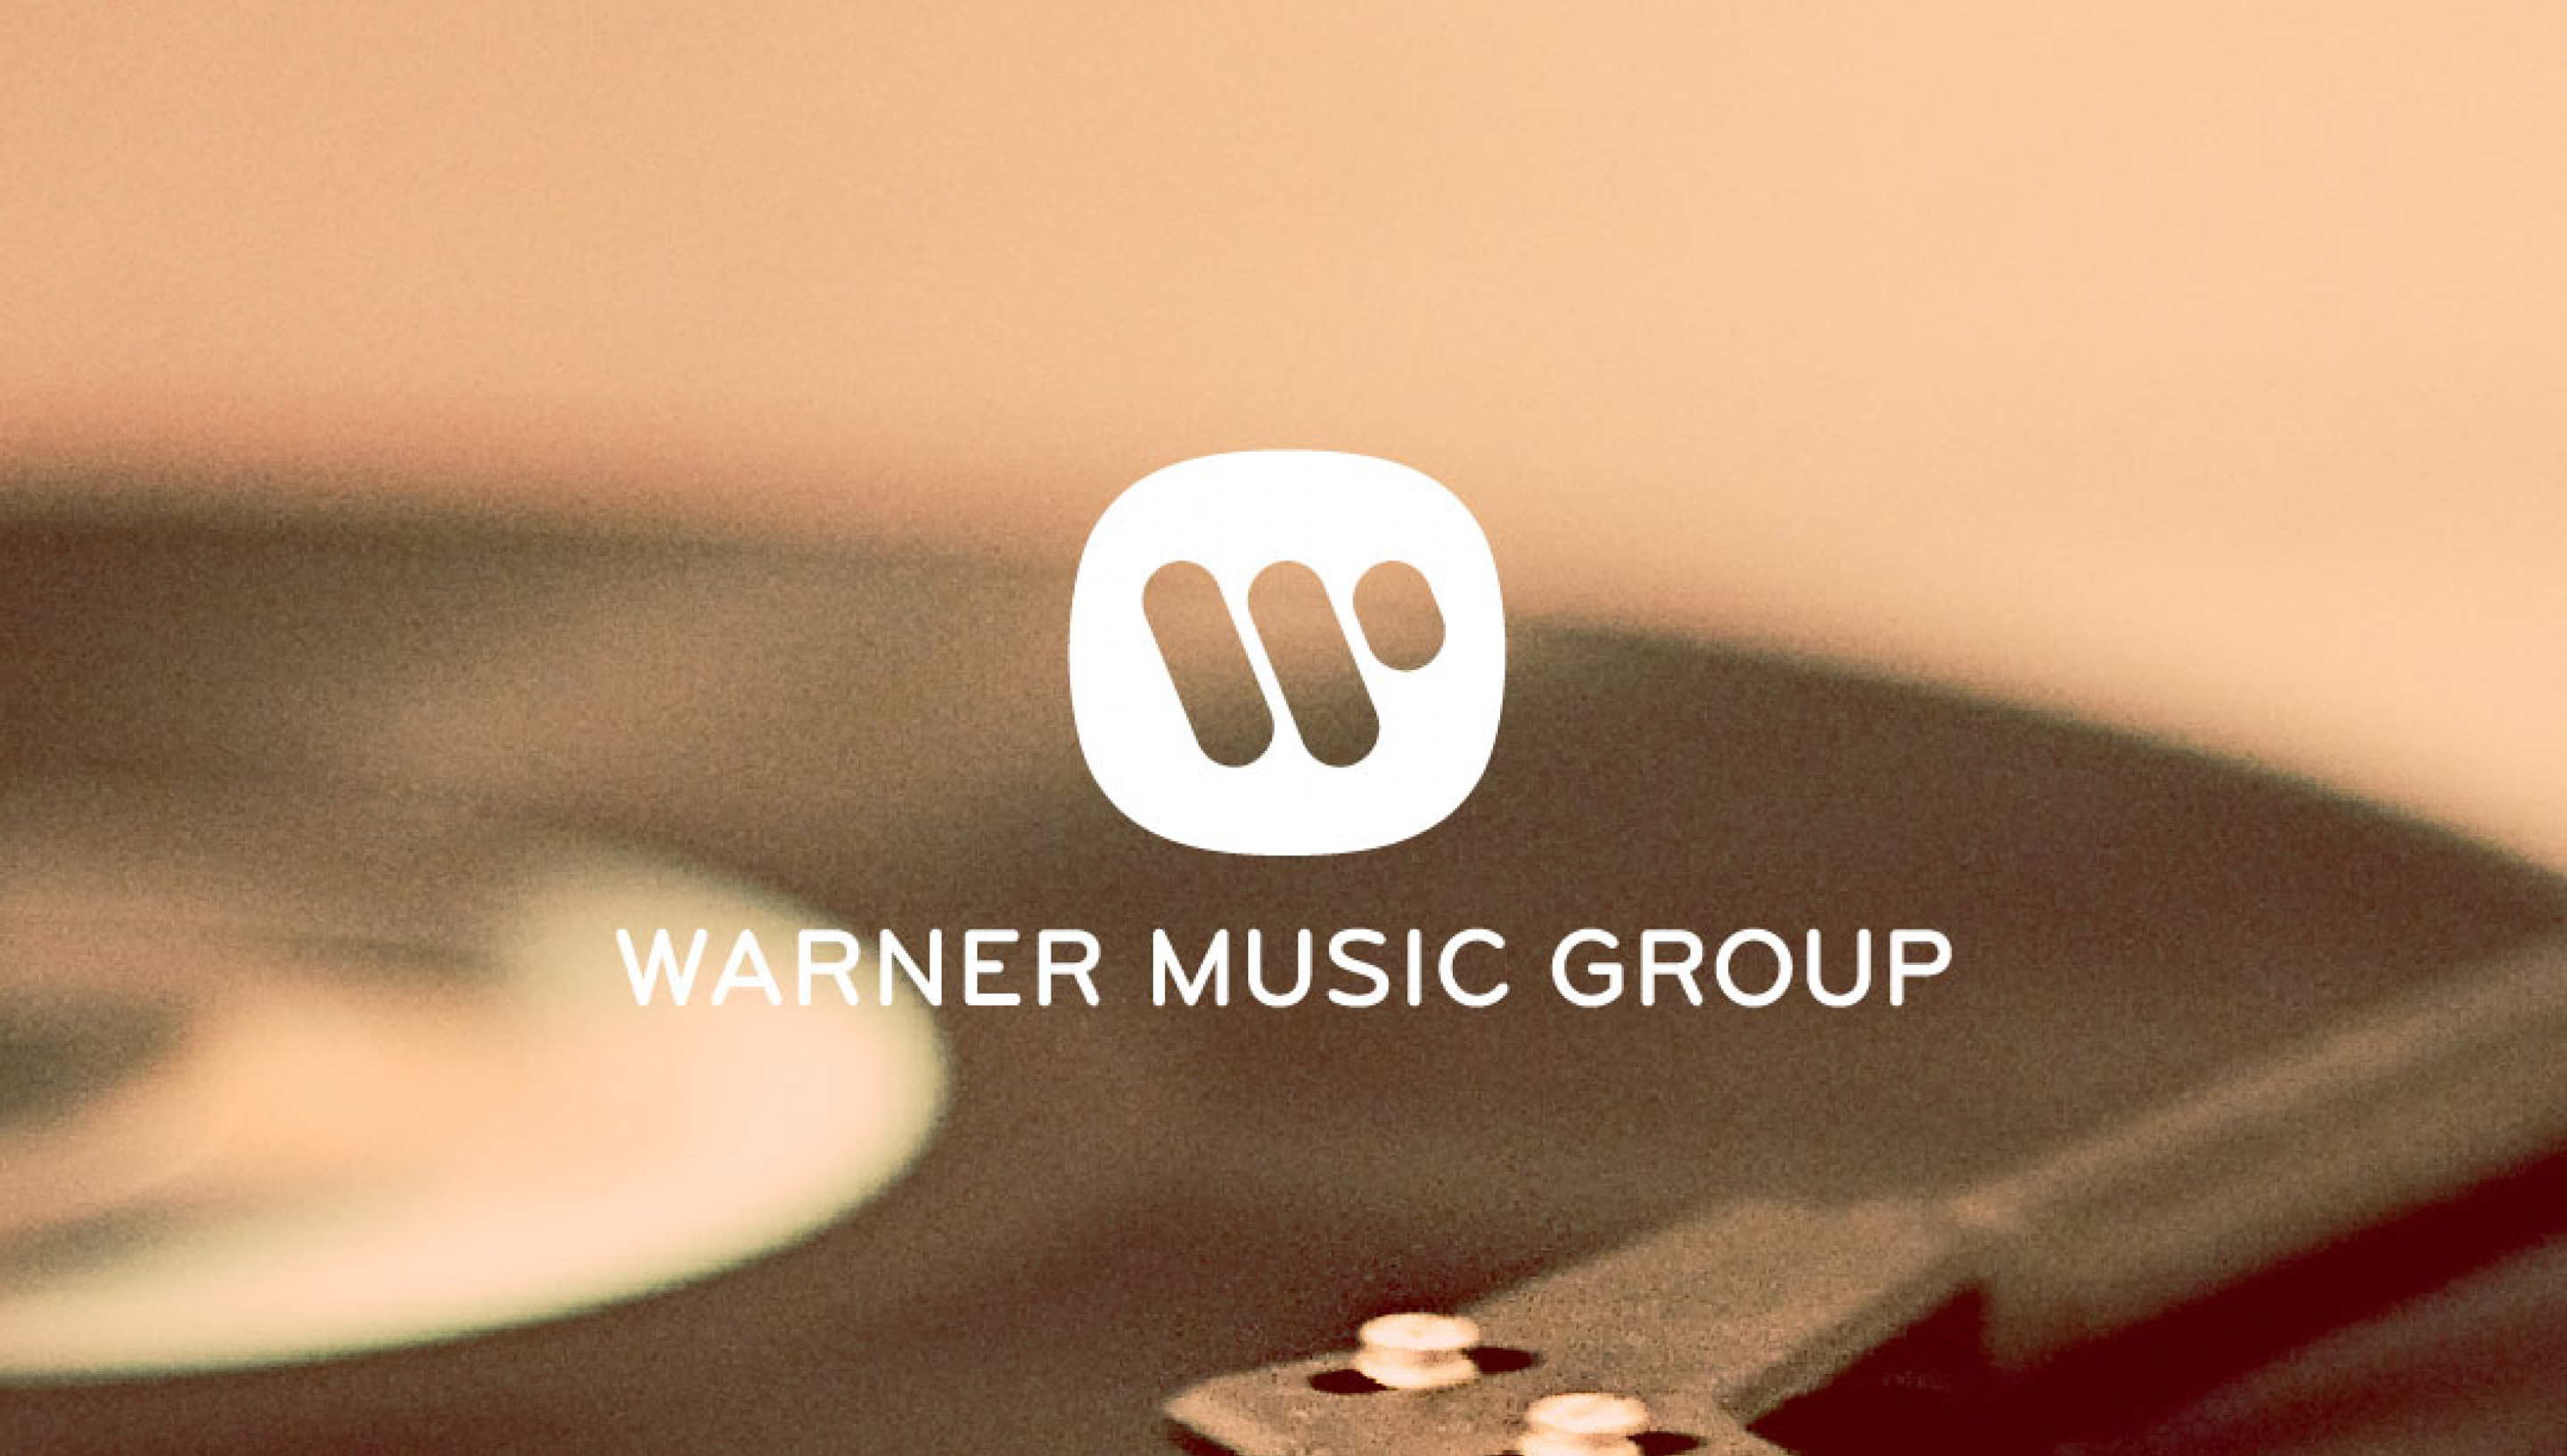 Streaming revenue up 29.4% for Warner Music Group